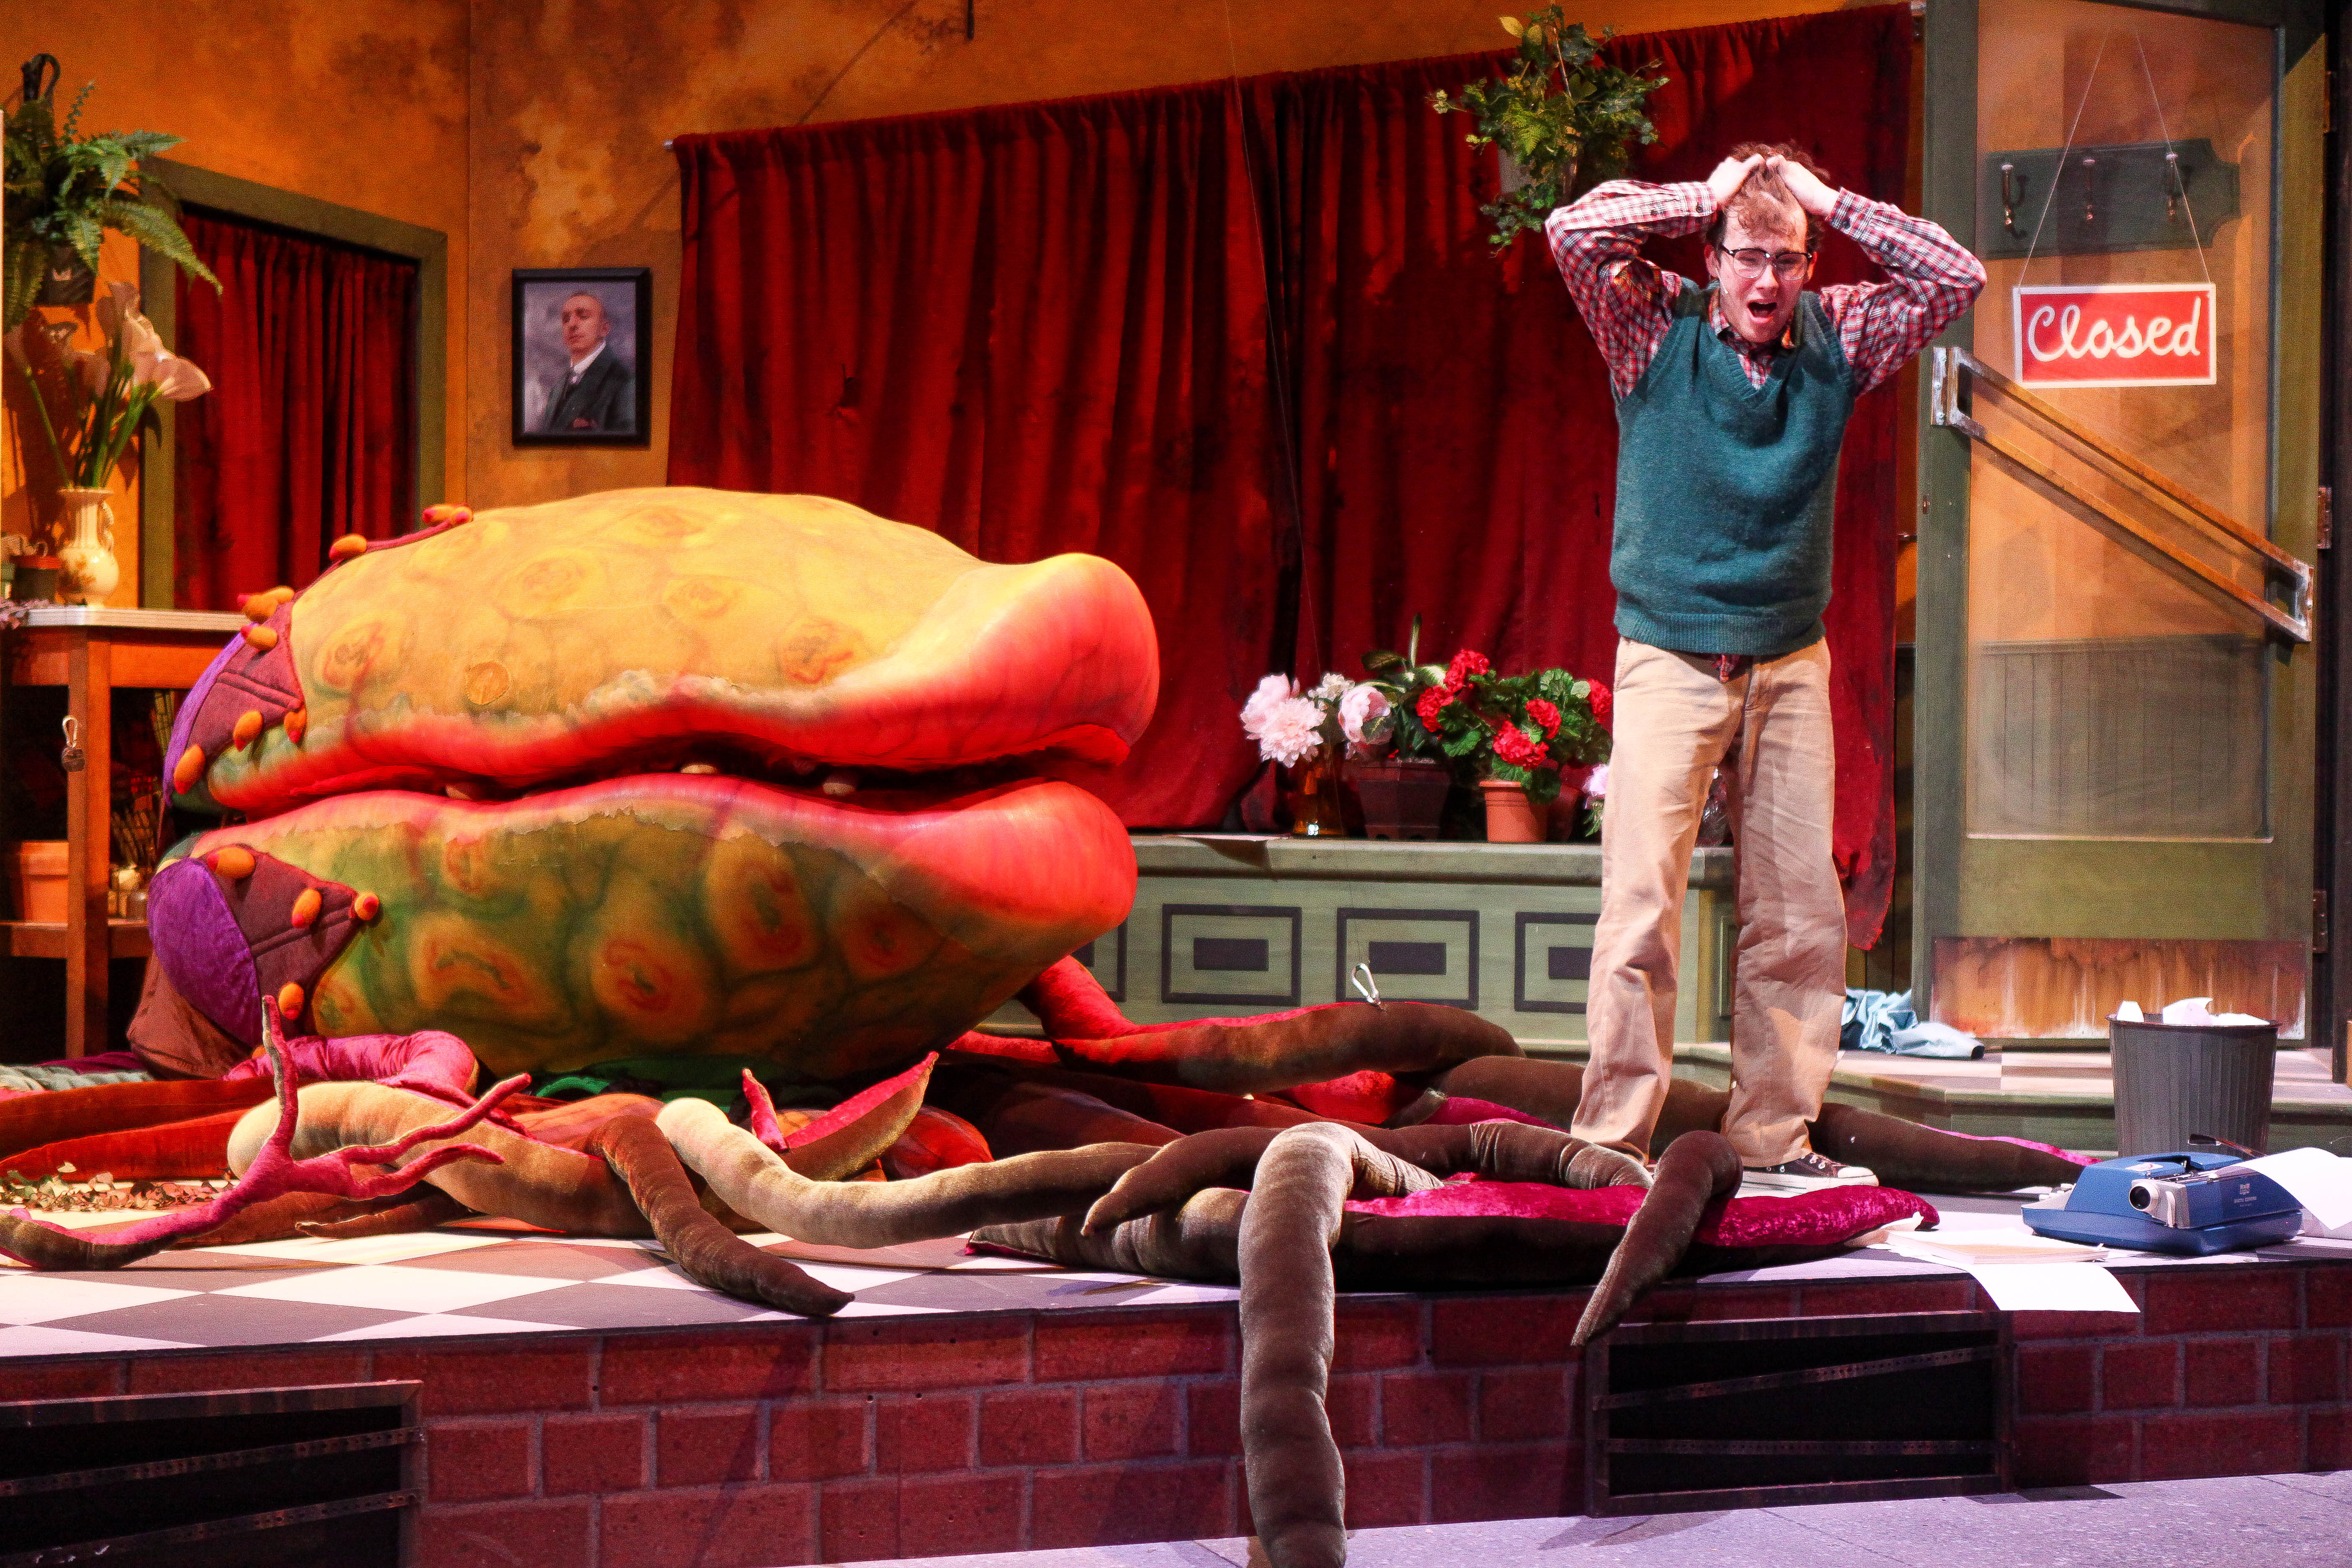 A theater set to look like a diner. To the left is a massive venus flytrap looking plant, bigger than a person. To the right, a man in a sweatervest holds his hands exasperatedly over his heads. Vines tangle across the floor.